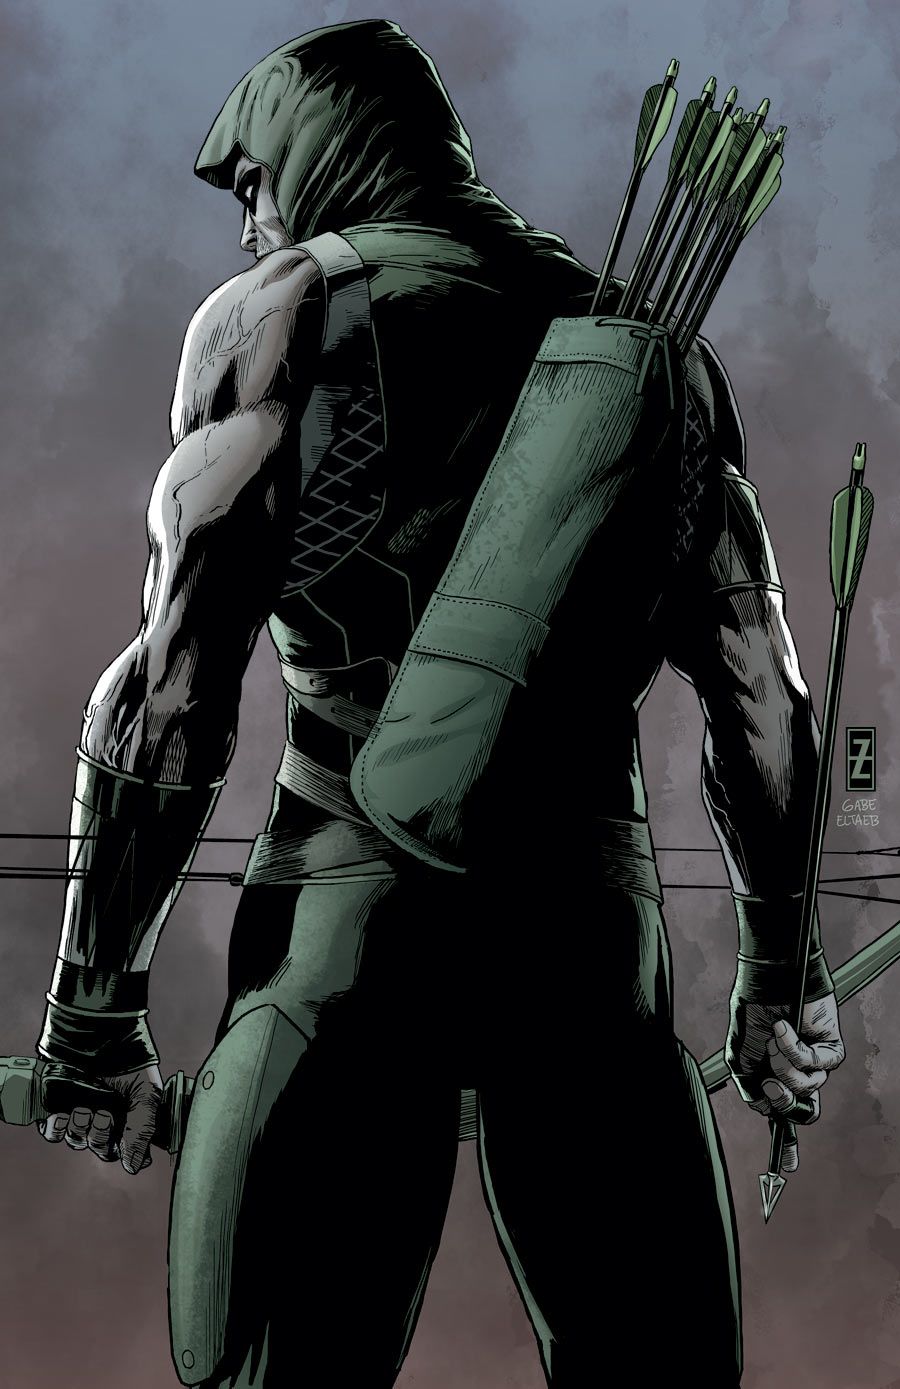 Phone Wallpaper For DC Marvel Characters. Green Arrow Comics, Arrow Comic, Arrow Dc Comics